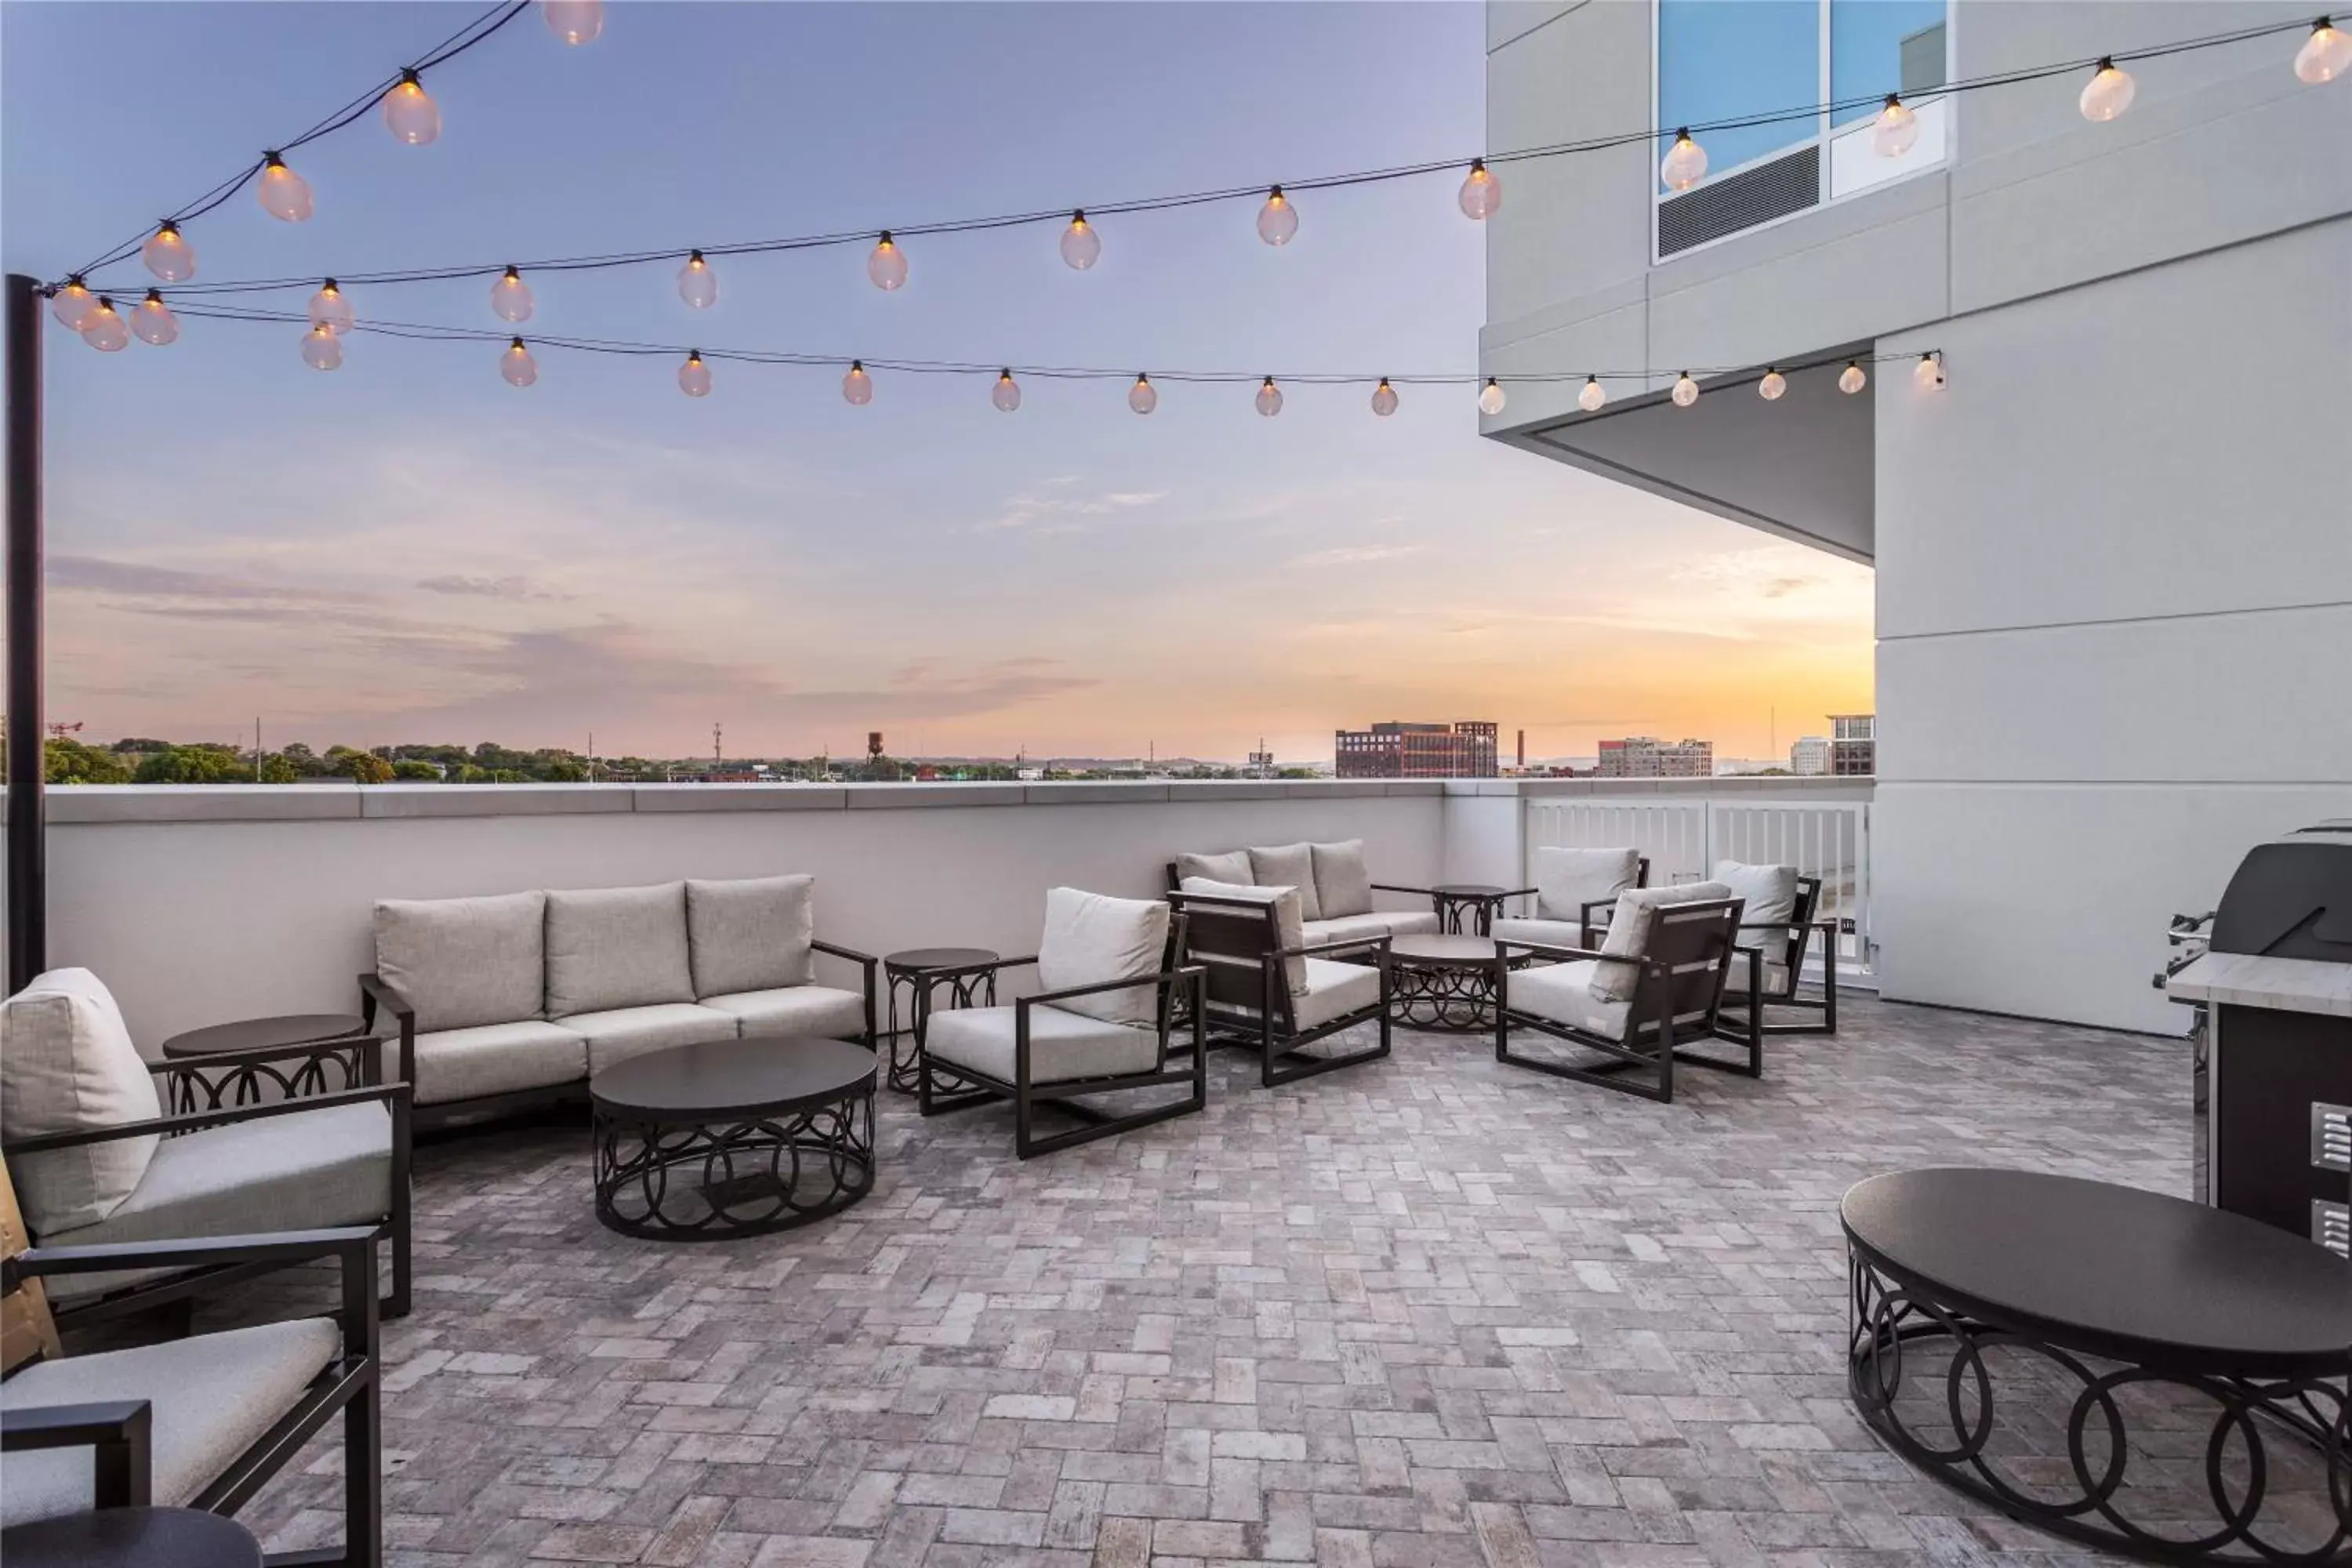 Patio in TownePlace Suites by Marriott Nashville Midtown